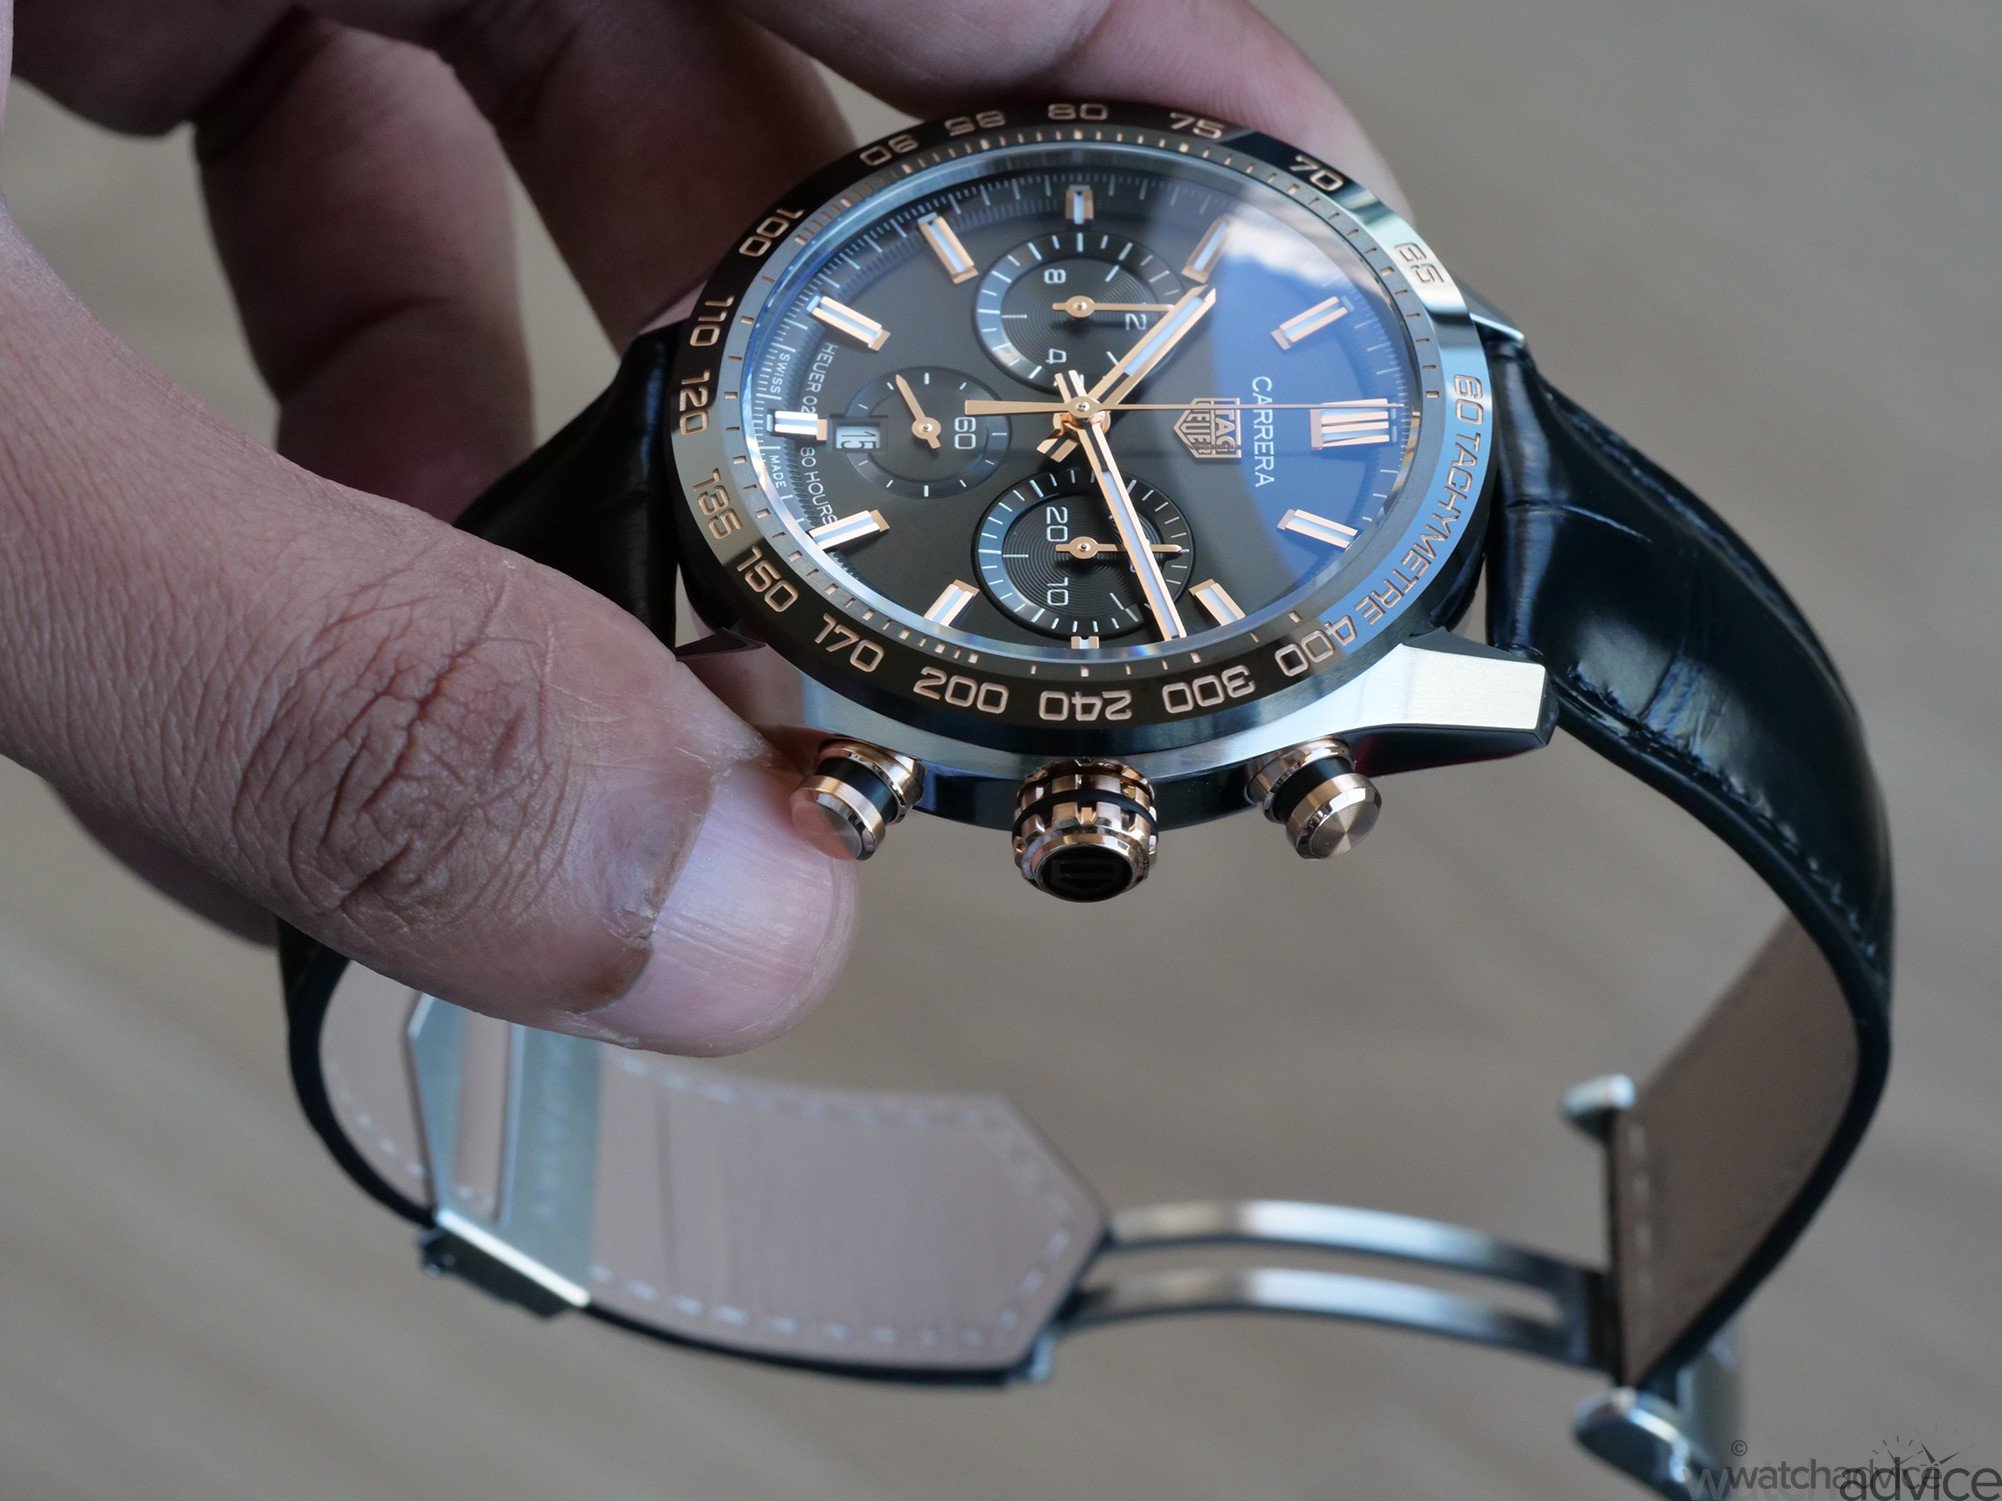 REVIEW: The 2020 TAG Heuer Carrera Chronograph 42mm Calibre Heuer 02 